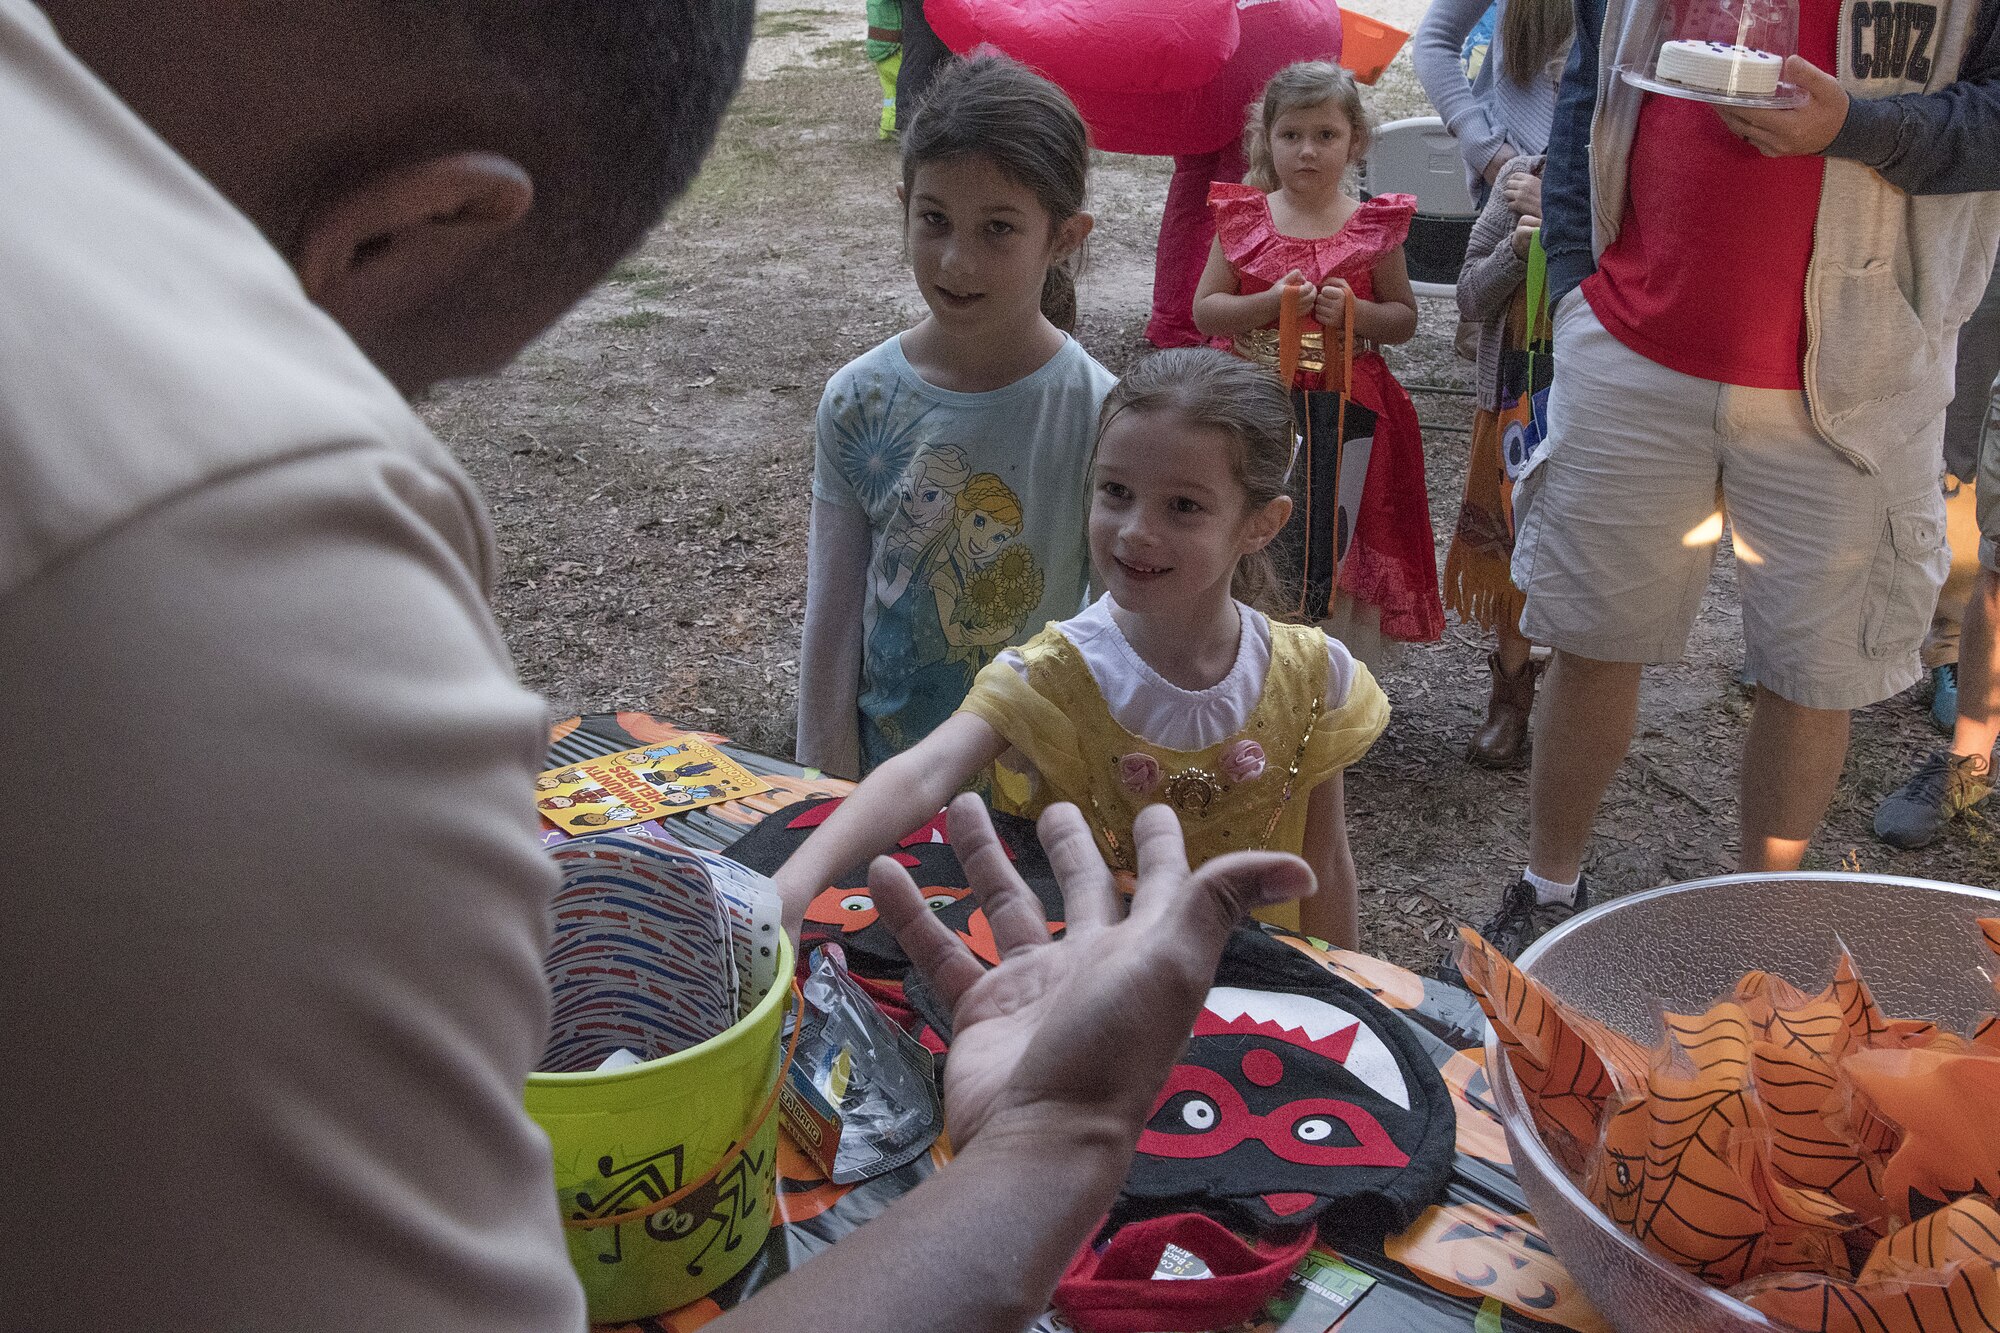 U.S. Air Force Tech. Sgt. Detrick Jack, 81st Force Support Squadron readiness NCO in charge, gives out candy to Della Brasier, daughter of Master Sgt. Sean Brasier, 2nd Air Force military training superintendent, during Ghouls in the Park at Marina Park at Keesler Air Force Base, Mississippi, Oct. 26, 2018. Ghouls in the Park also featured the Boo Bus, a haunted house and various games for children of all ages. (U.S. Air Force photo by Airman 1st Class Suzie Plotnikov)